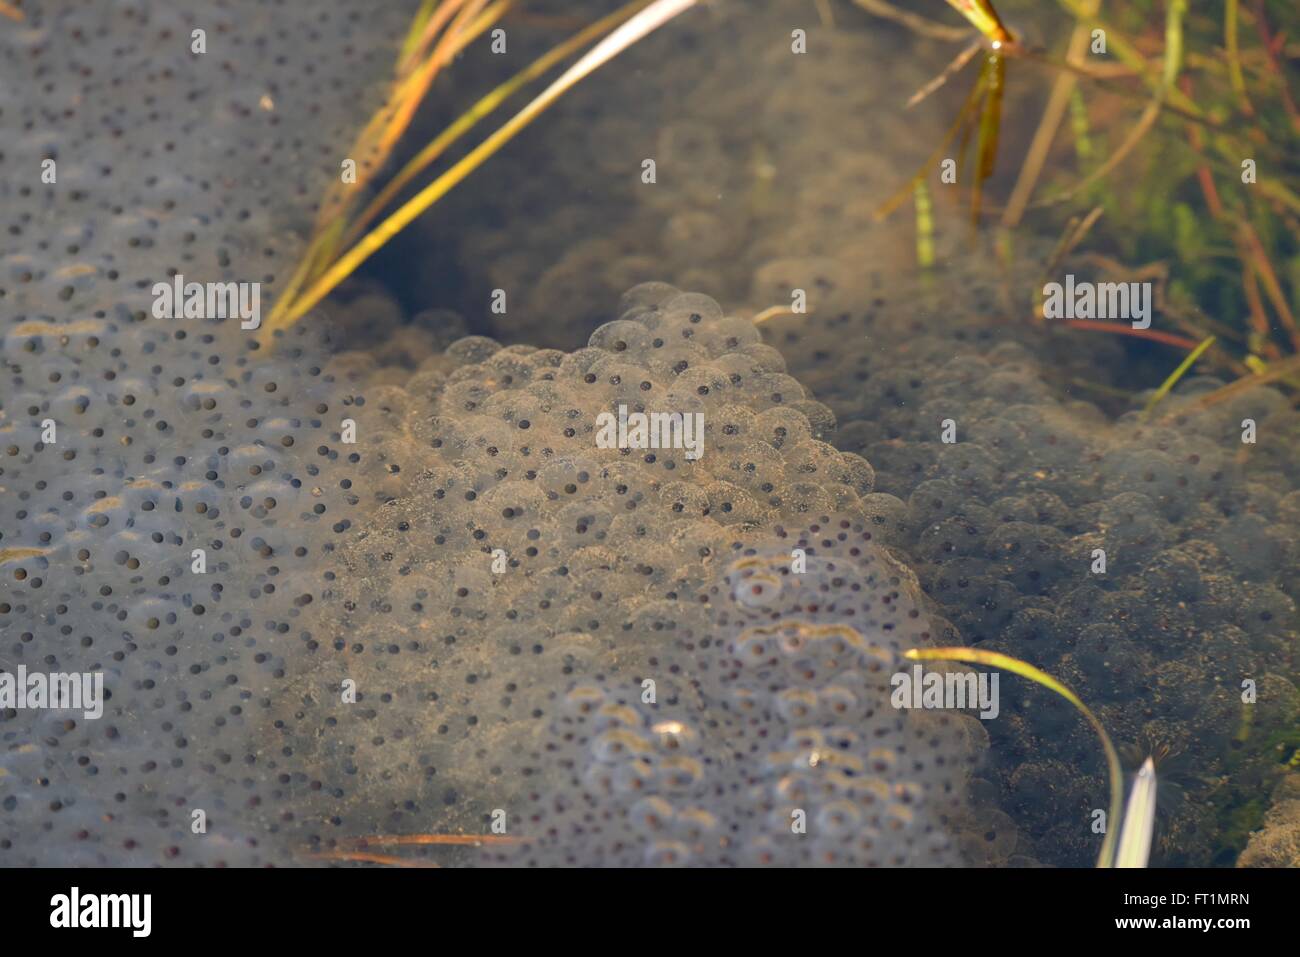 Frog or toad spawn in a shallow water in springtime. Stock Photo